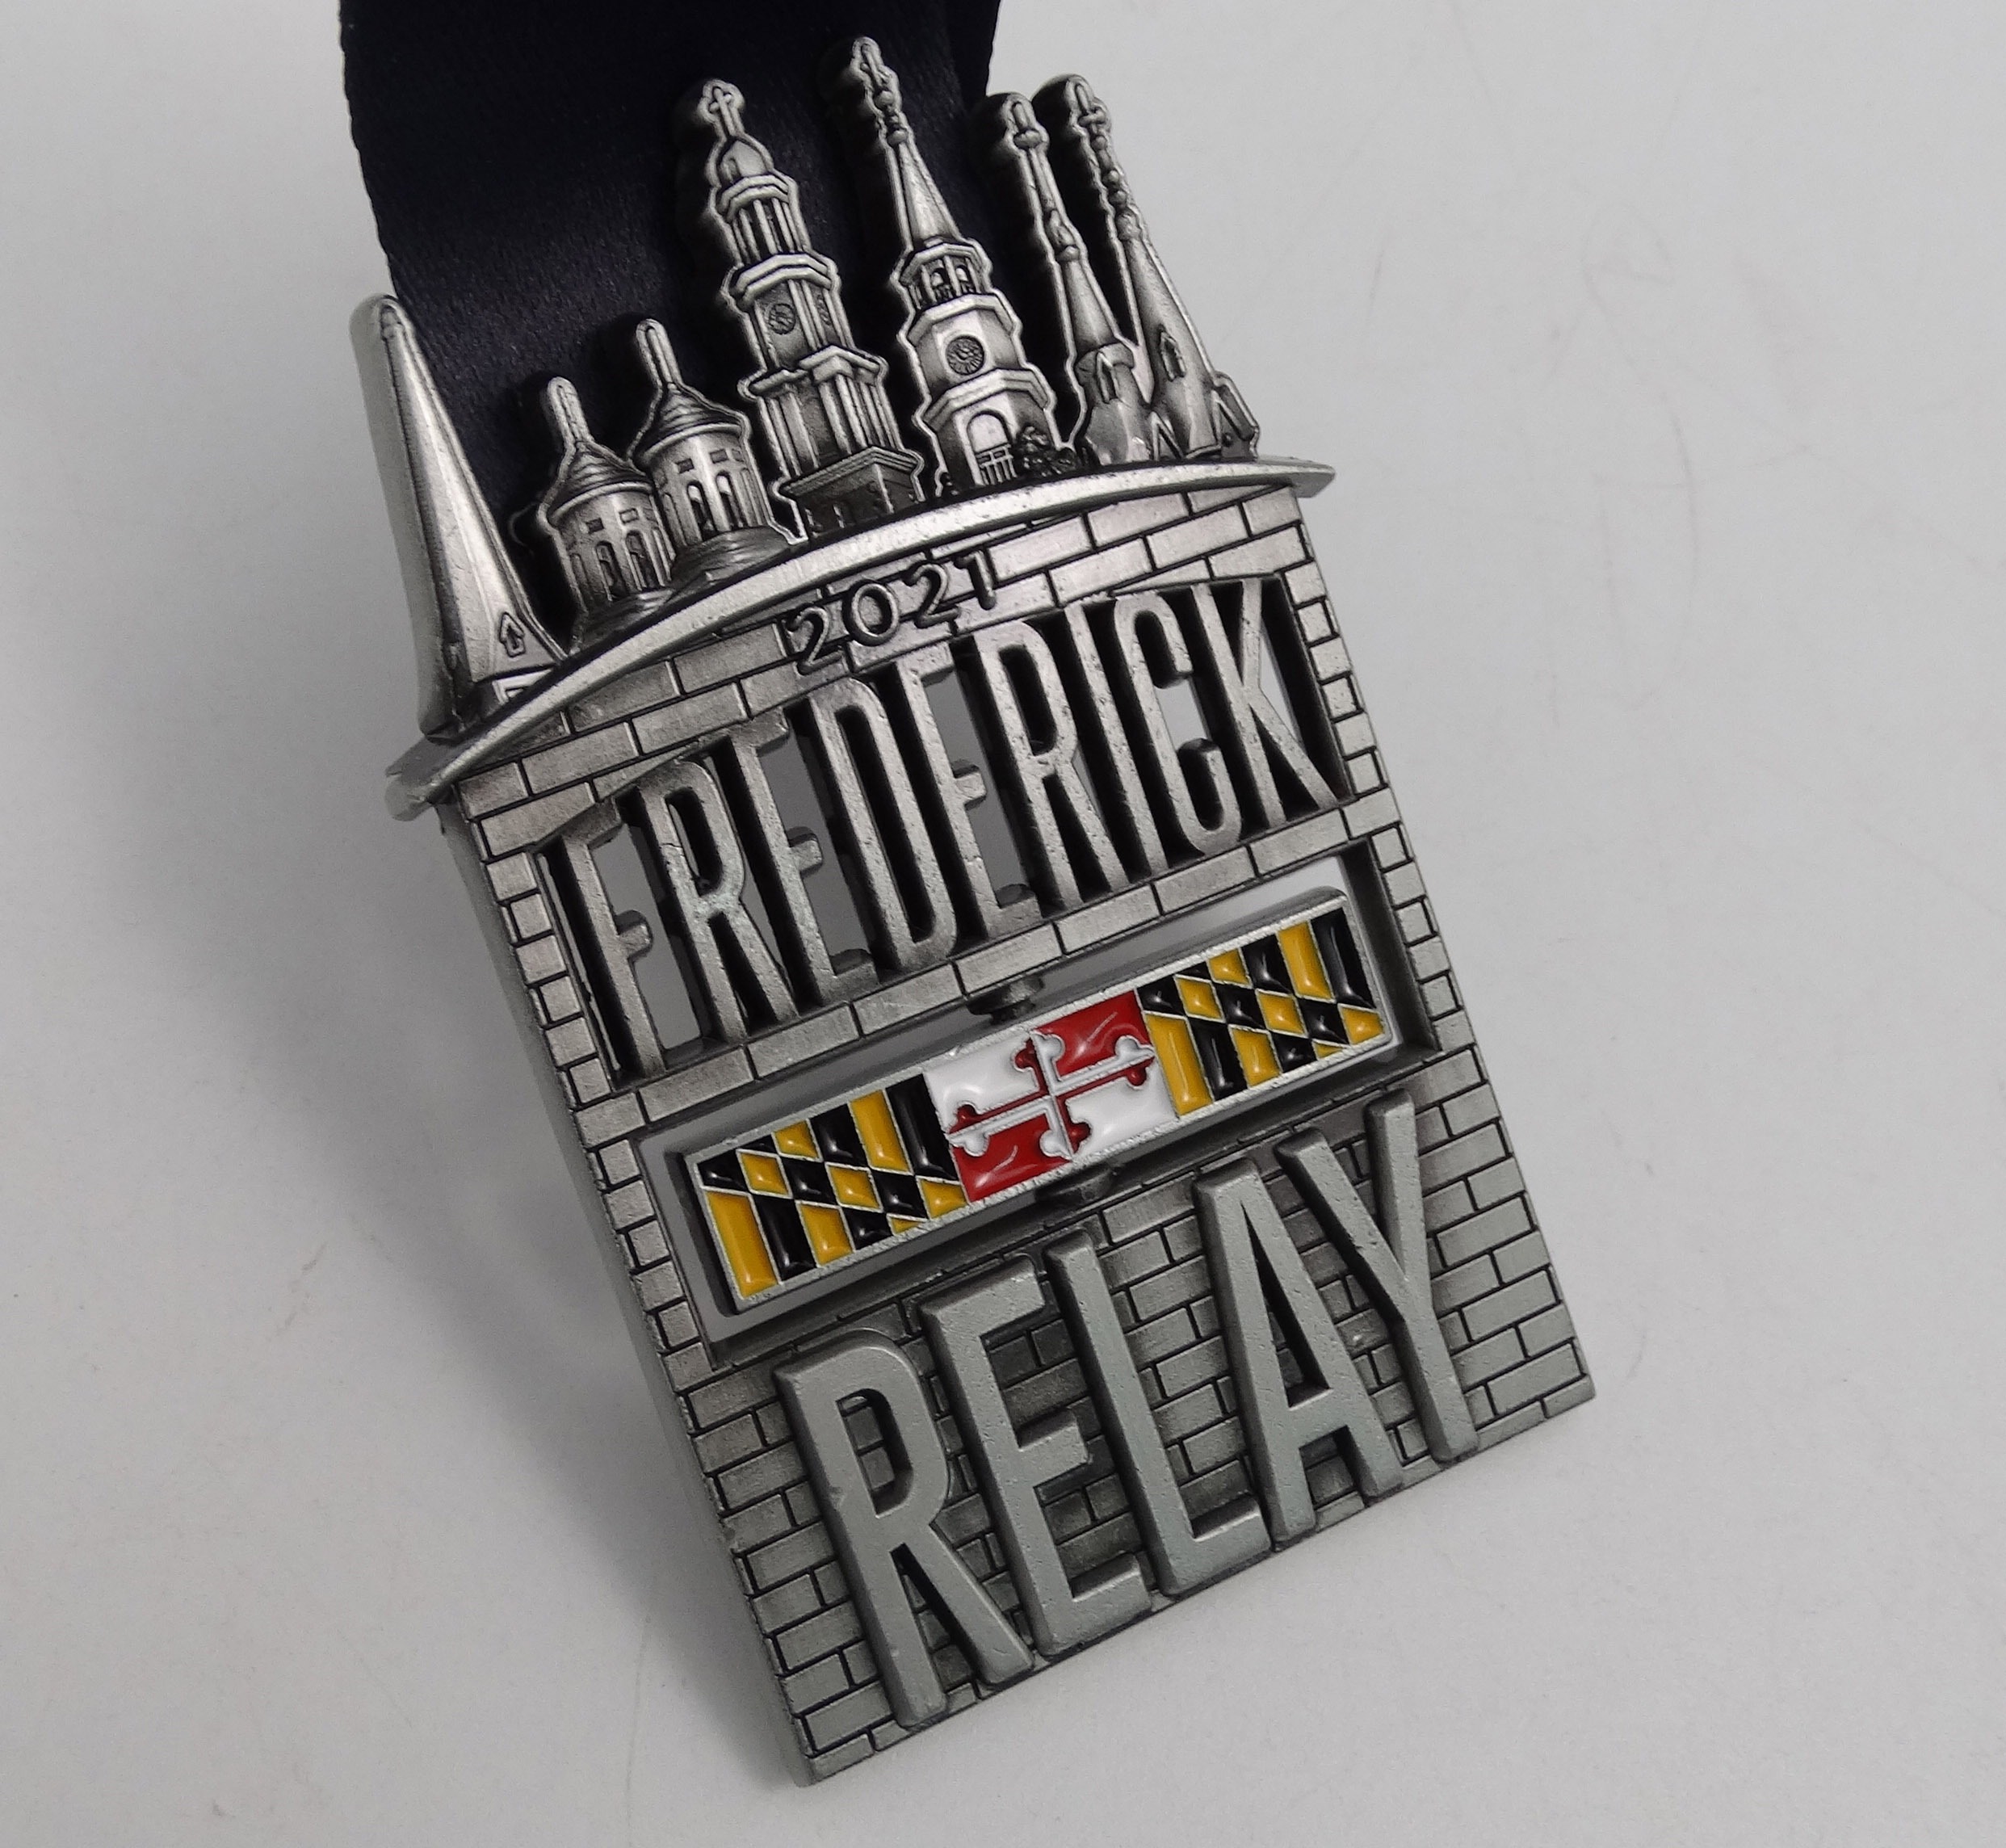 frederick-relay-medal-side-view-12-14